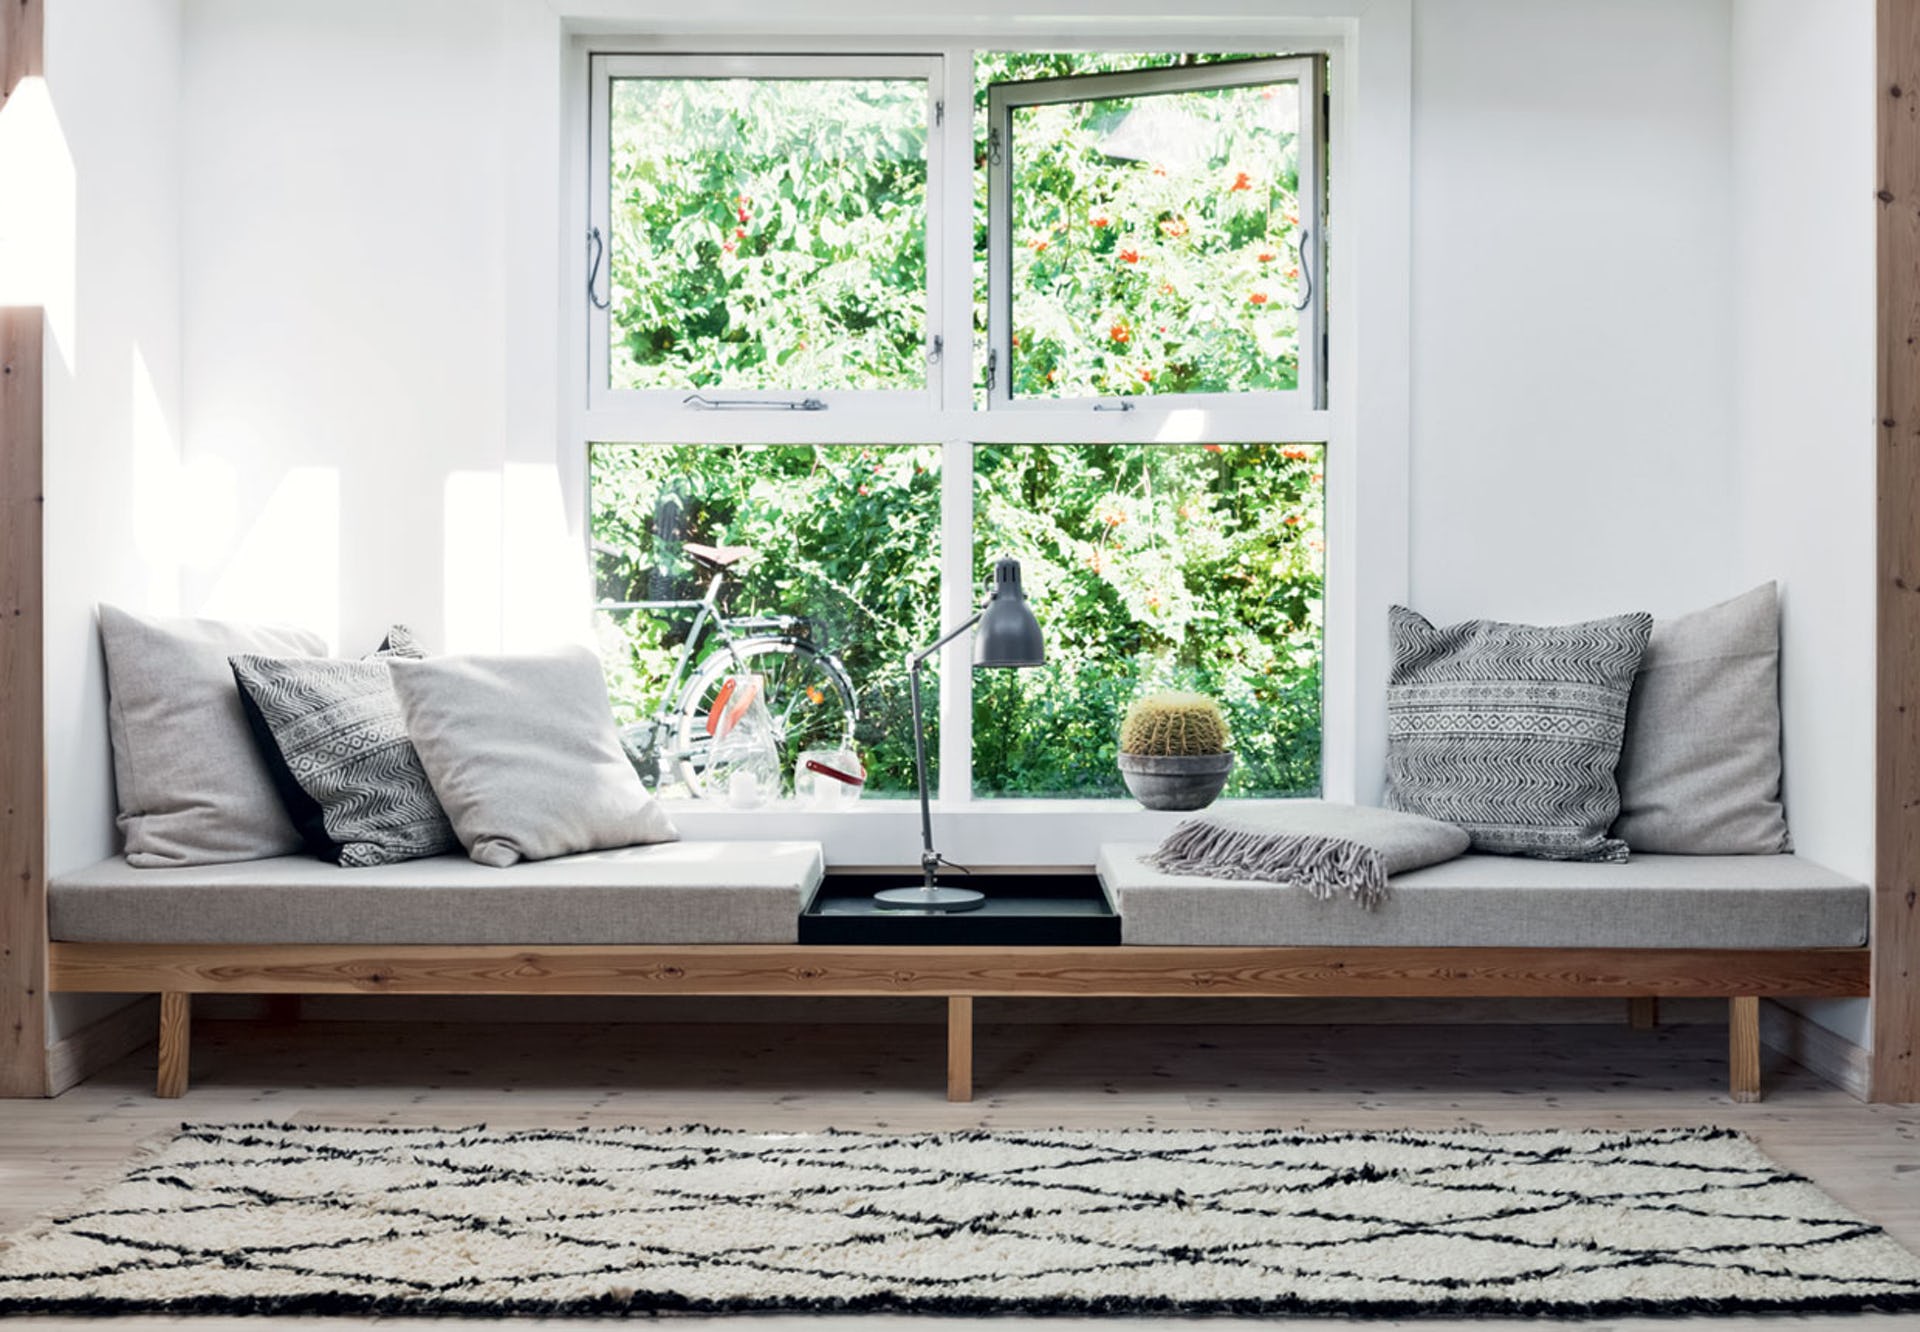 6 types of daybeds: the built-in